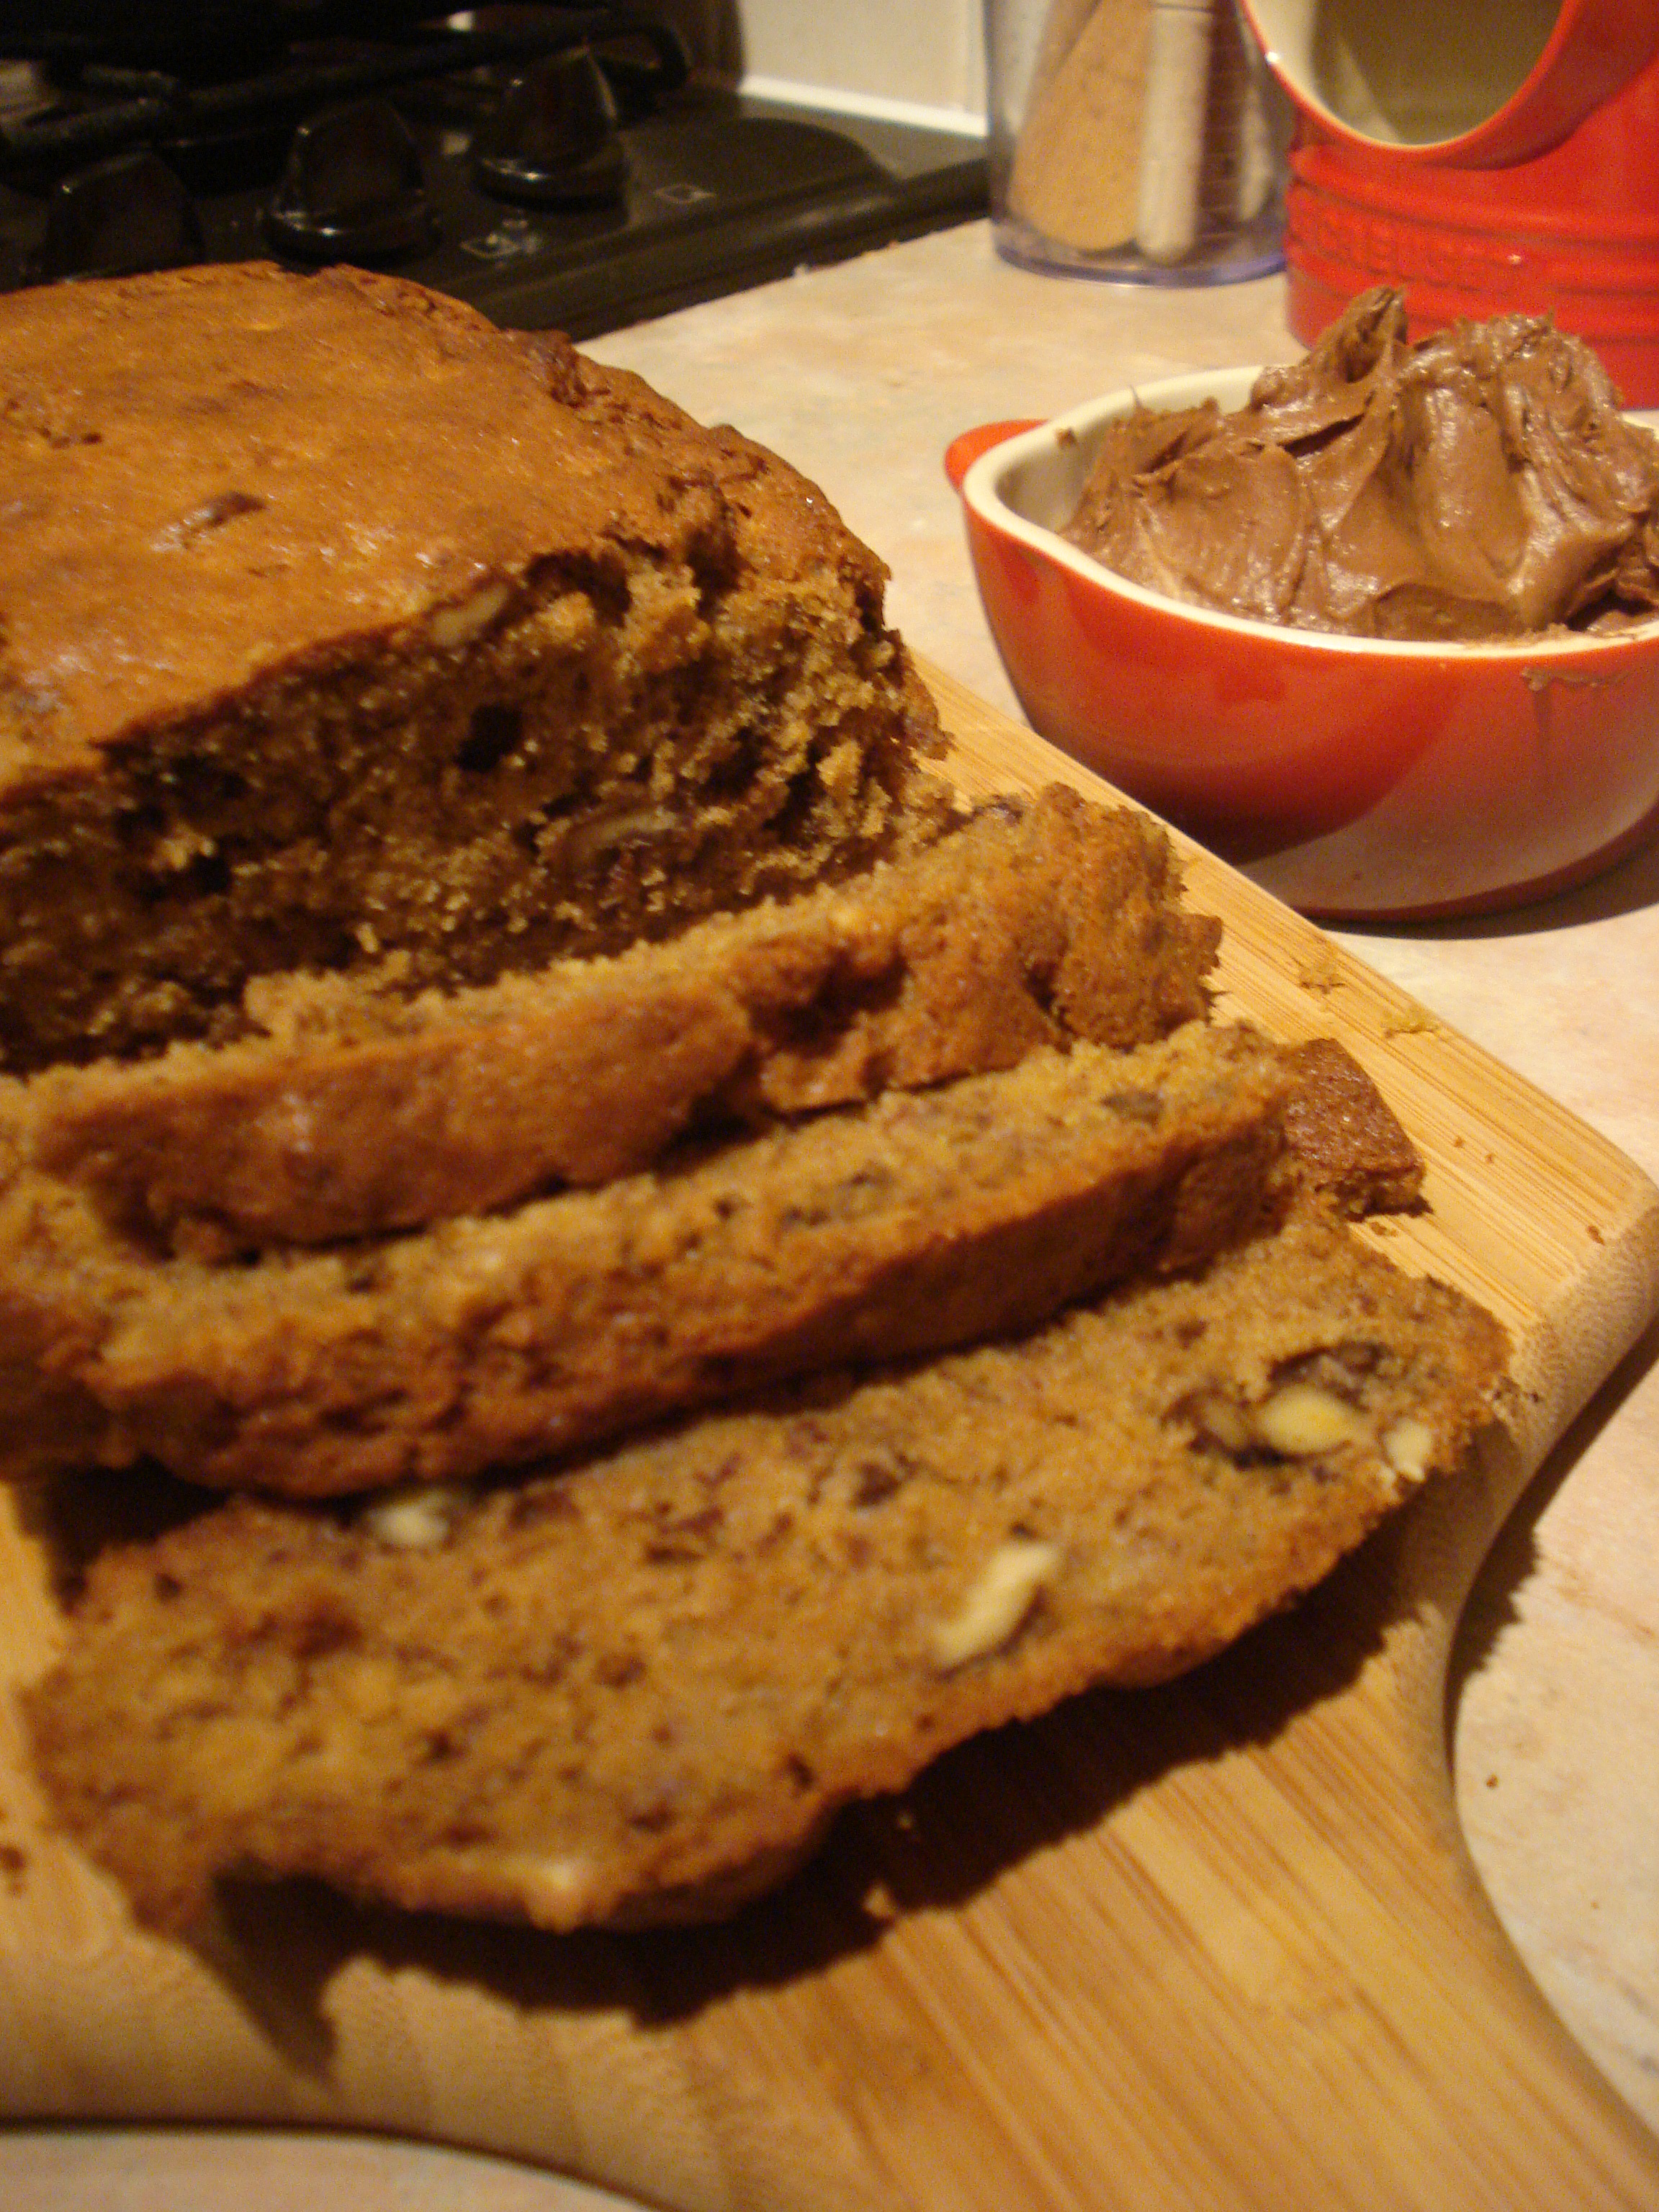 walnut and banana loaf with chocolate orange butter